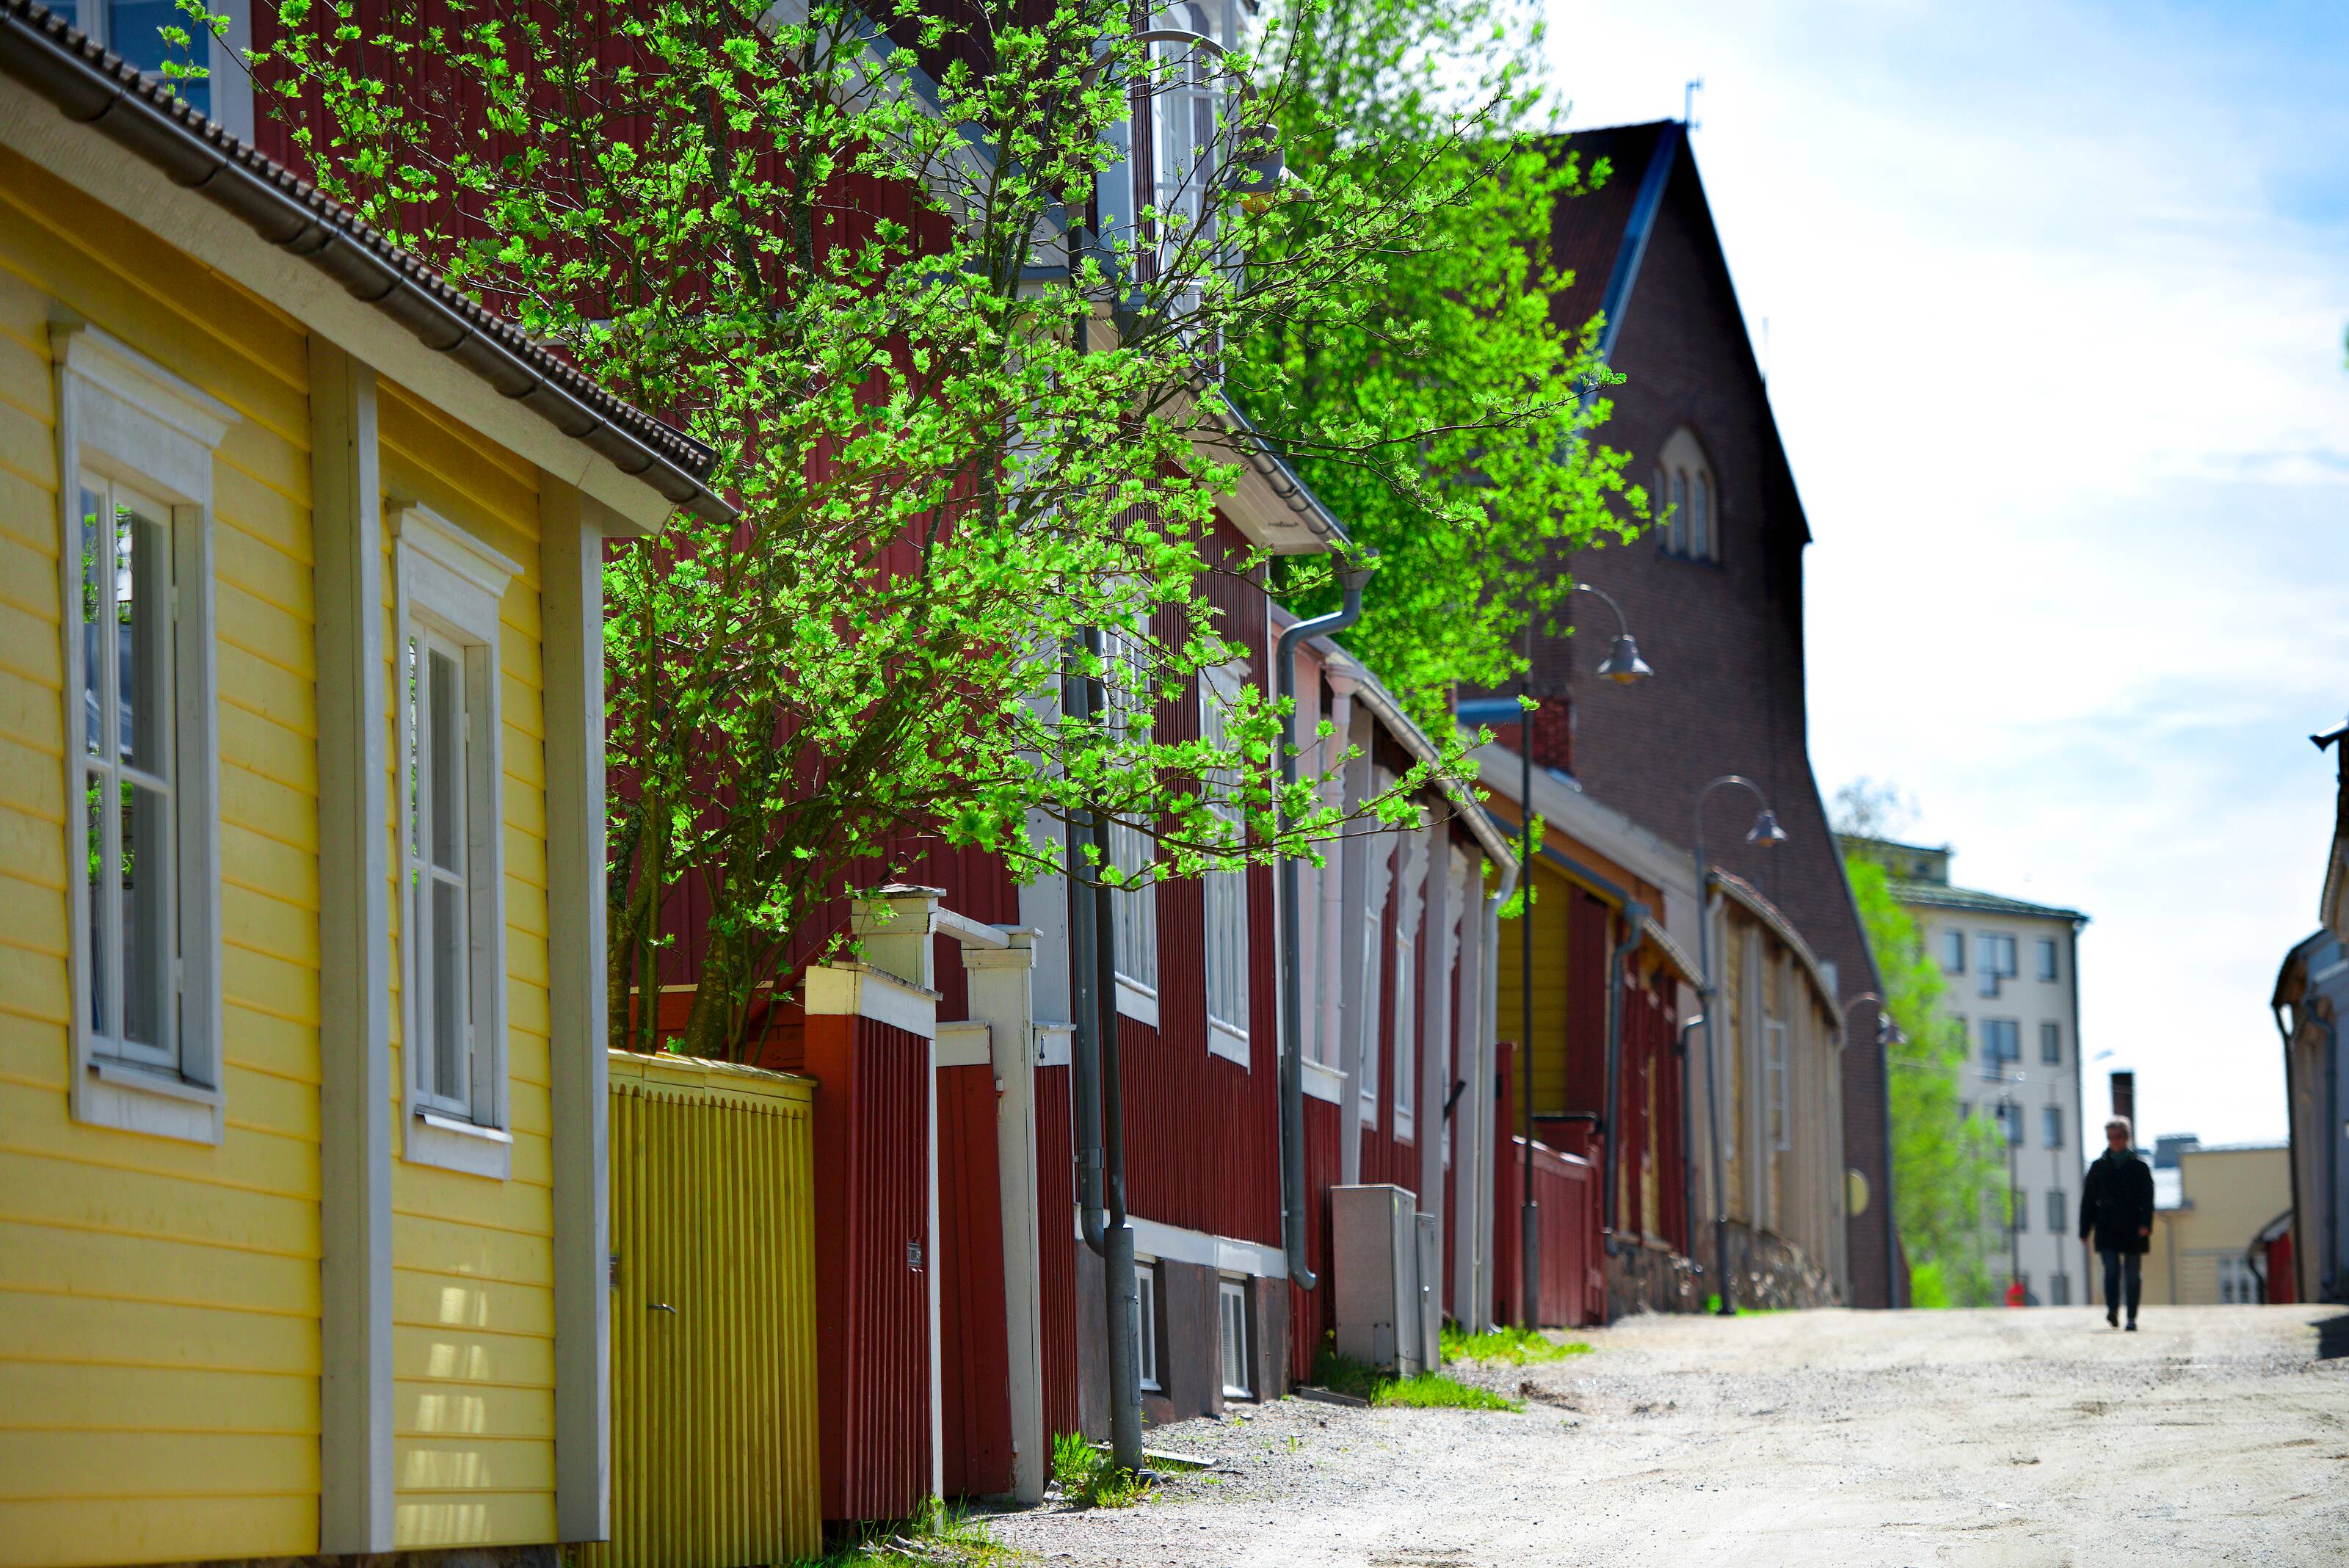 Streets of an old wooden town in the Finnish coast